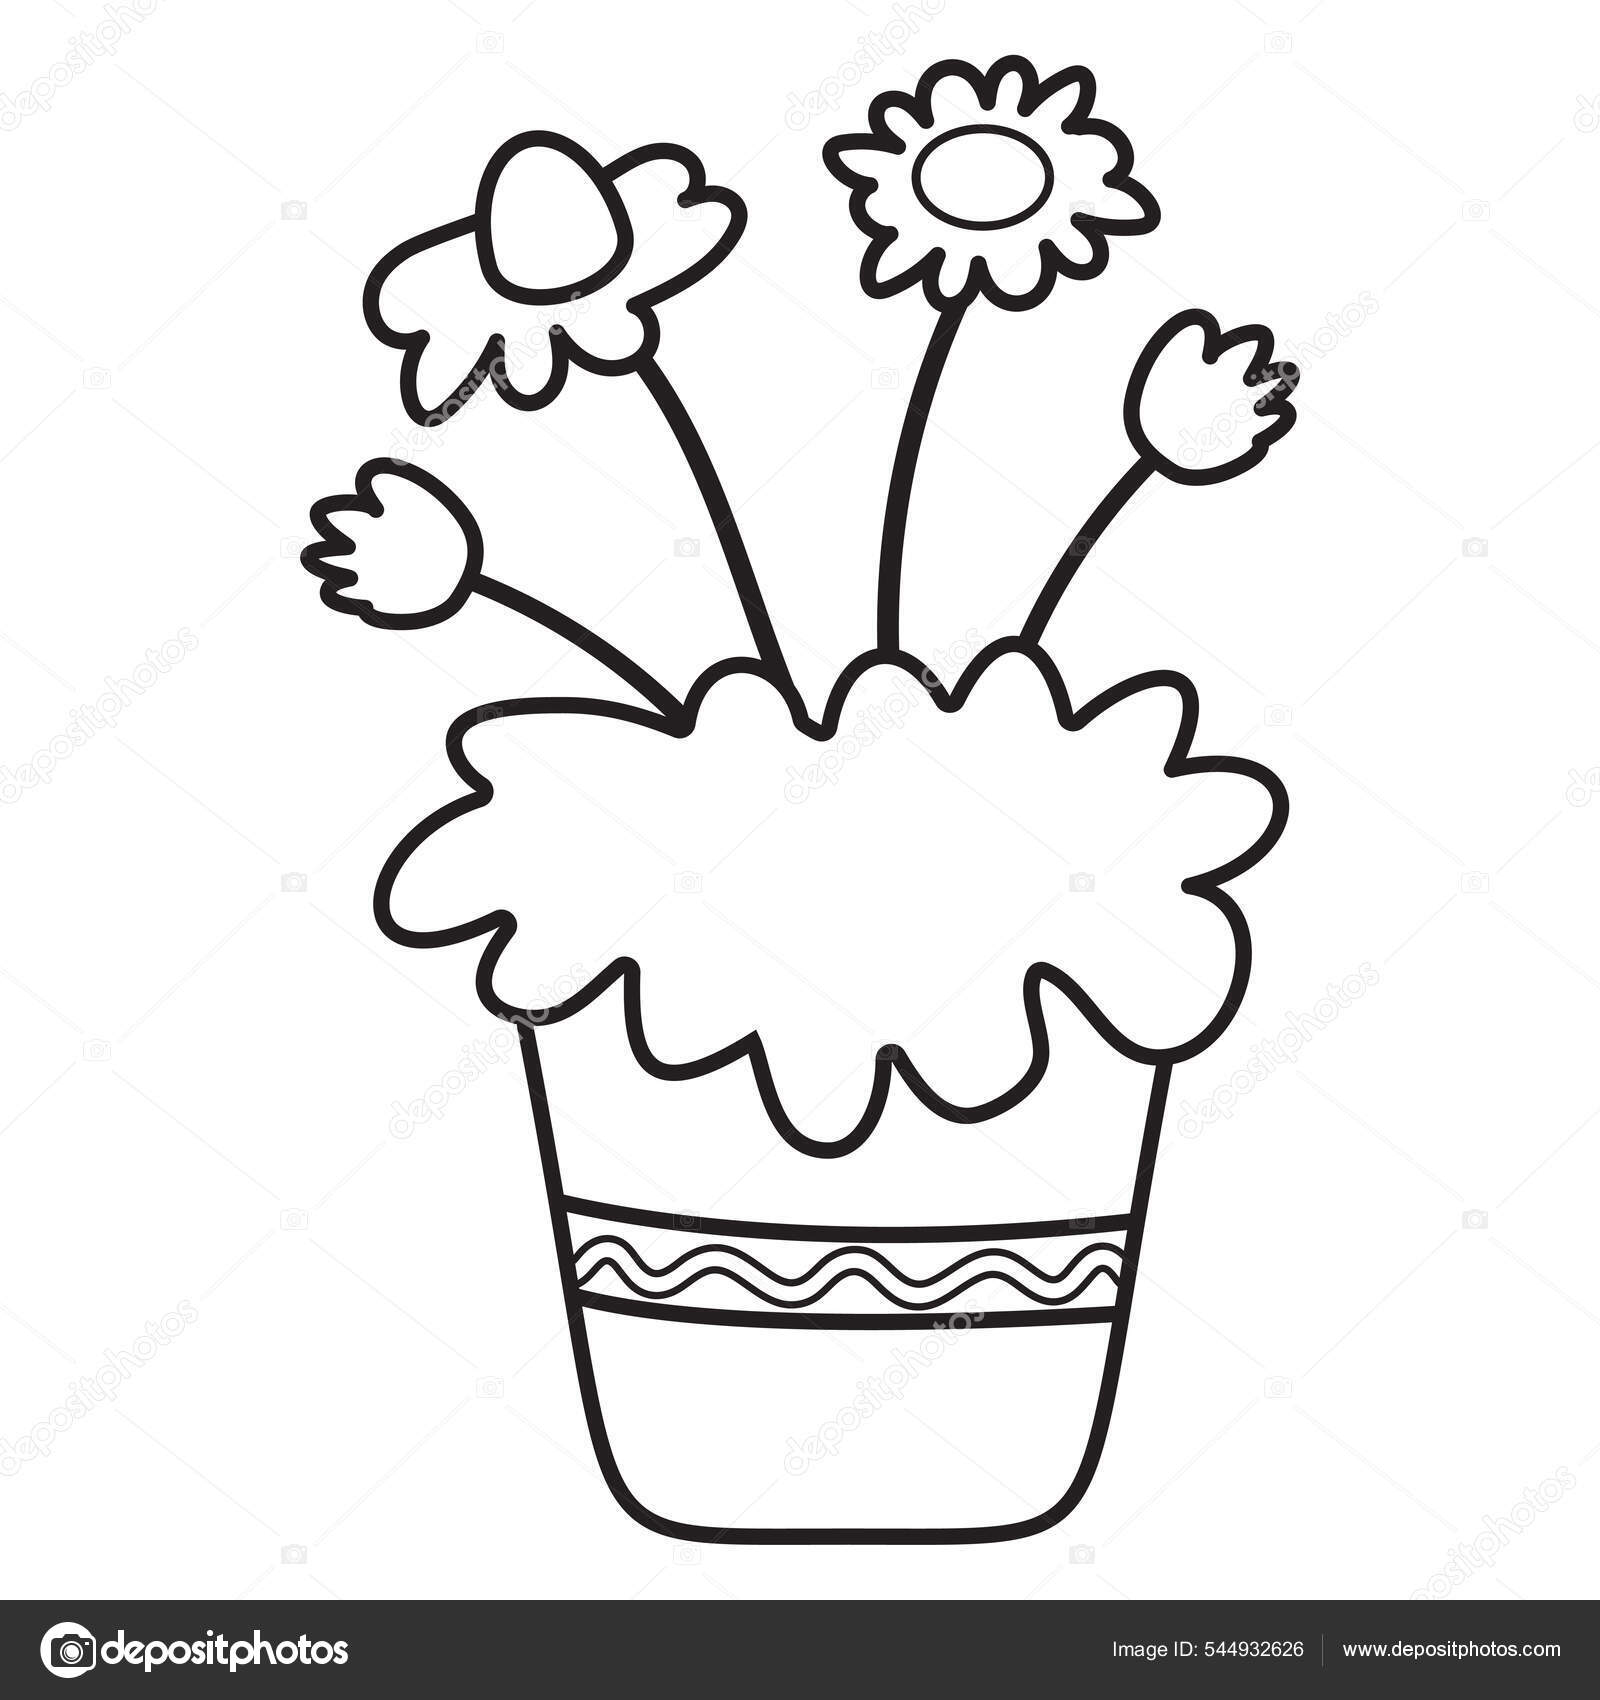 Flower pot coloring page kids illustration nature plant elements flowering stock vector by meiyuanchinagmail